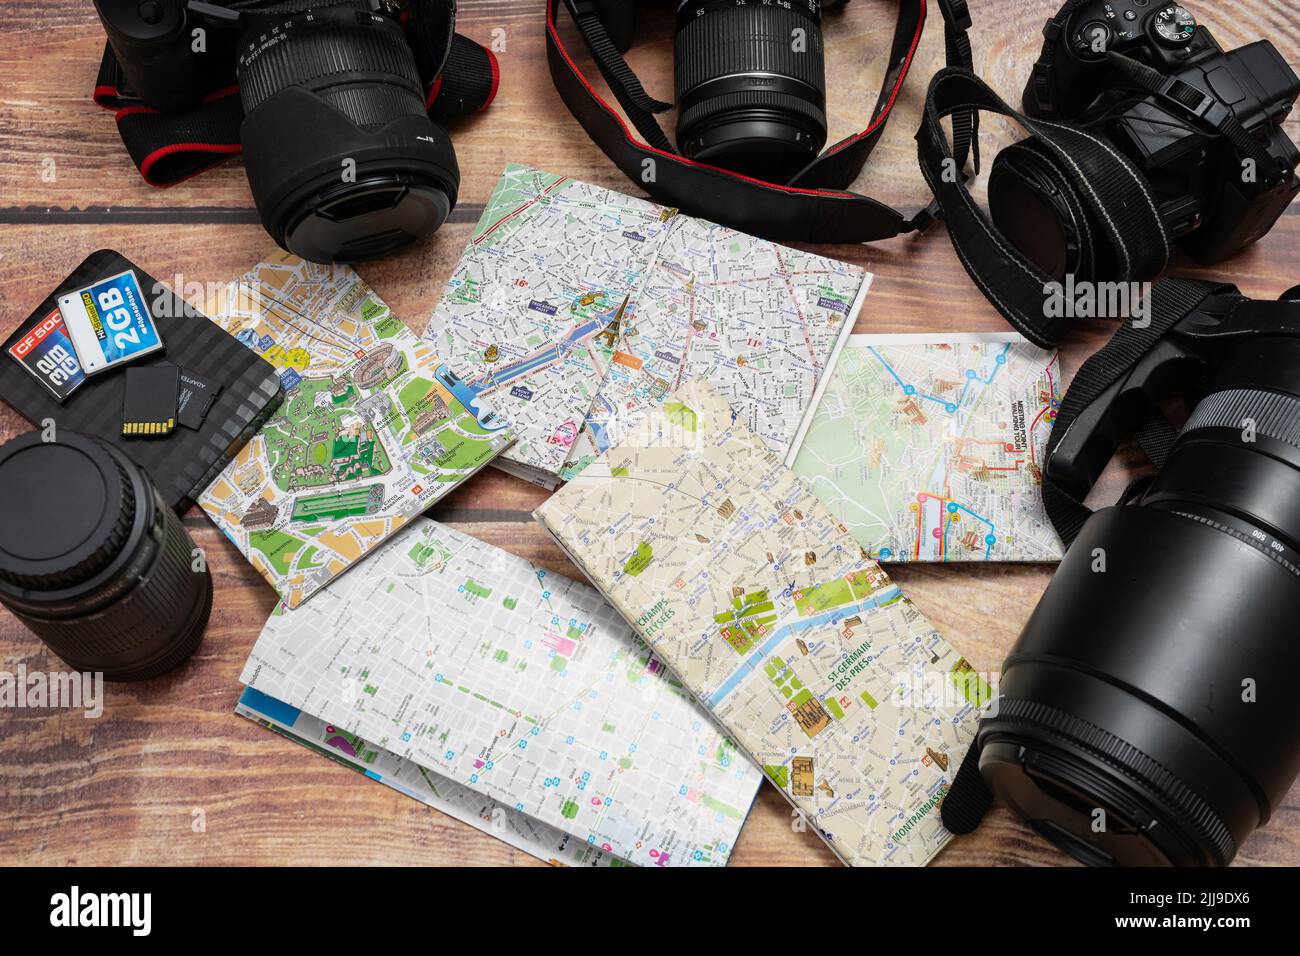 City maps next to cameras and passport on a wooden table. Concept of vacations, travels, travelers, Copy space. Stock Photo